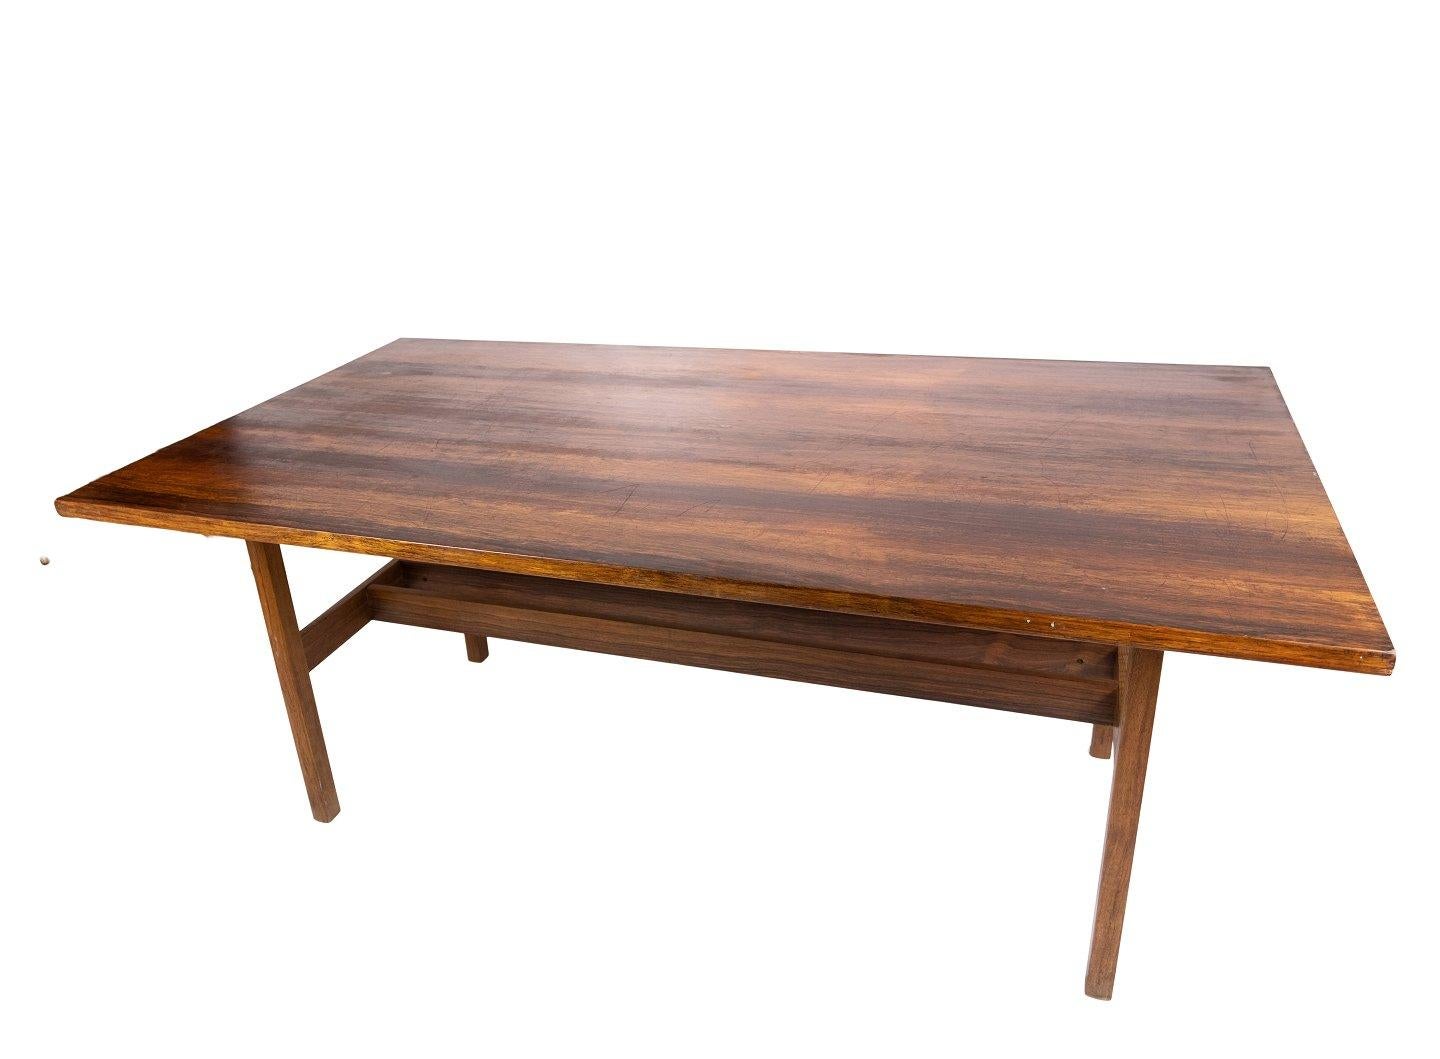 Mid-Century Modern Dining Table Made In Rosewood, Danish Design From 1960s For Sale